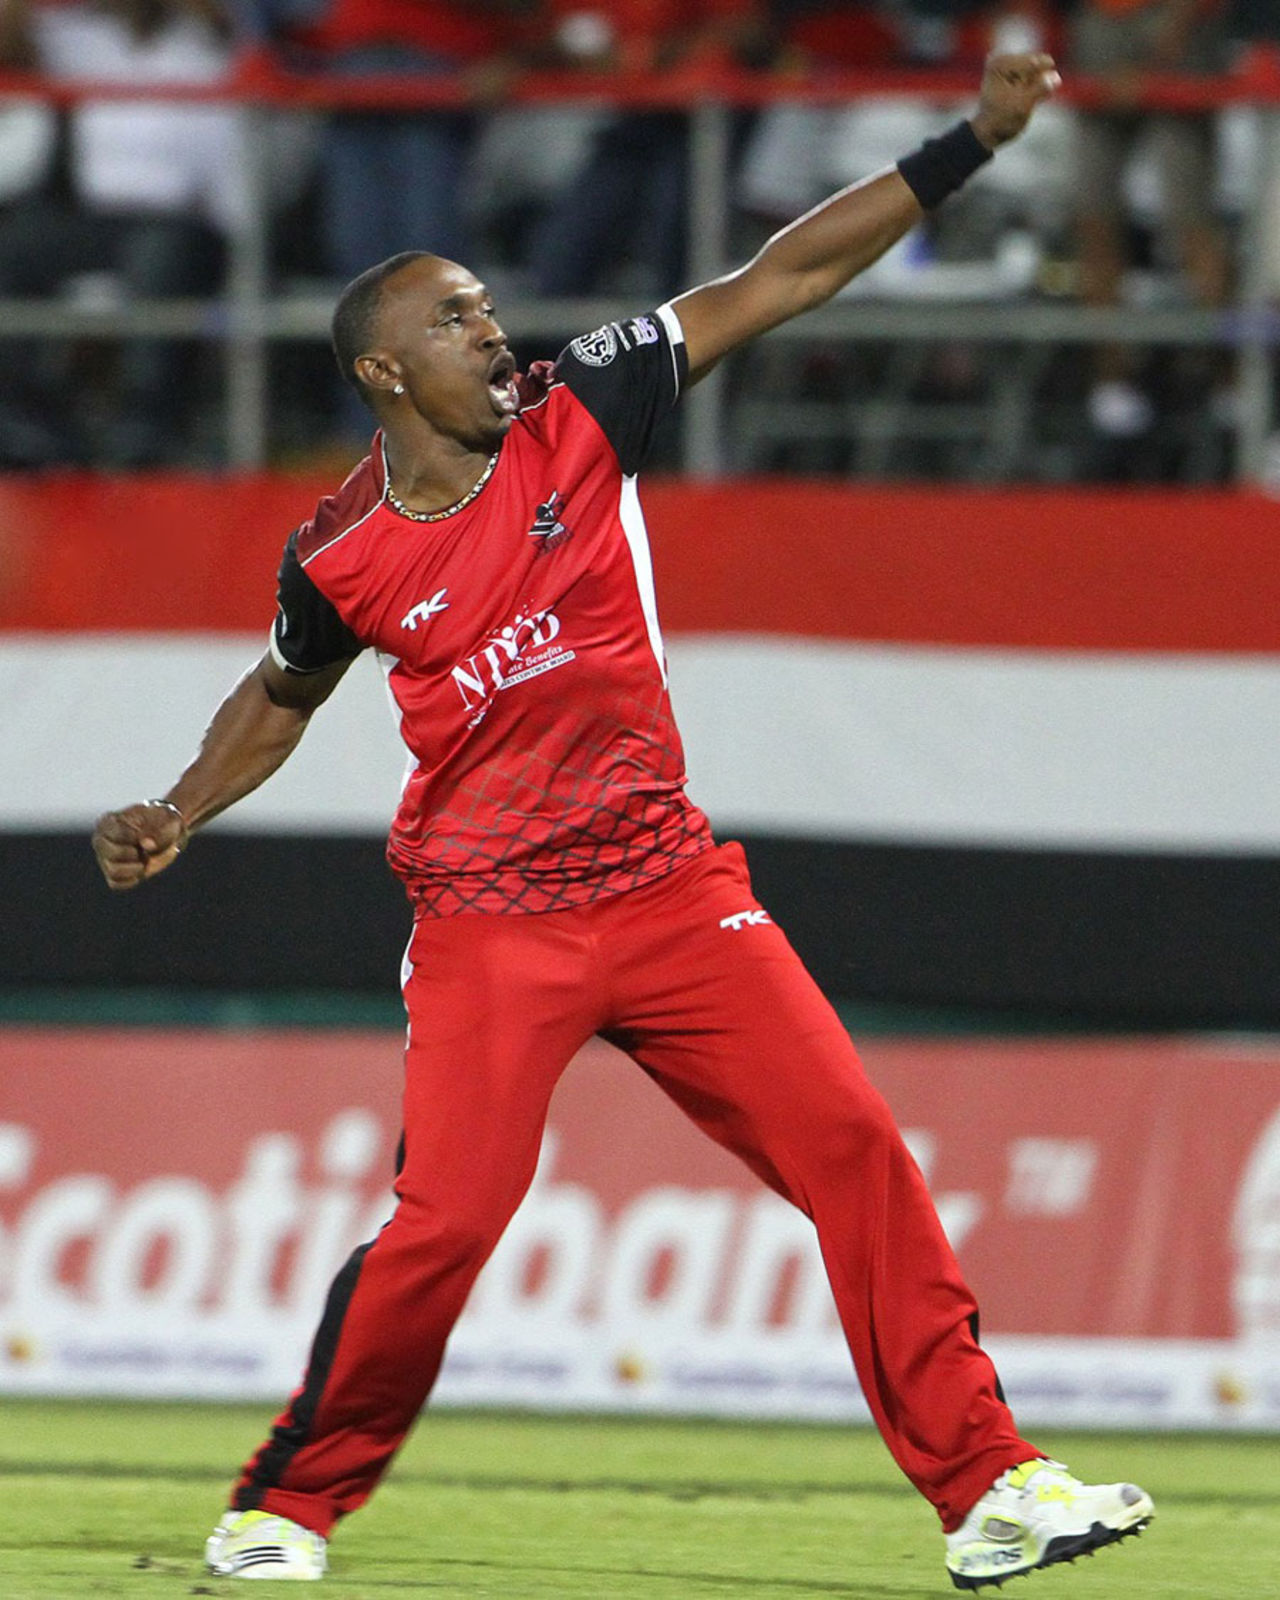 Dwayne Bravo began well but was taken for 26 runs in the 19th over, Trinidad & Tobago Red Steel v Jamaica Tallawahs, Caribbean Premier League, Port-of-Spain, August 7, 2013